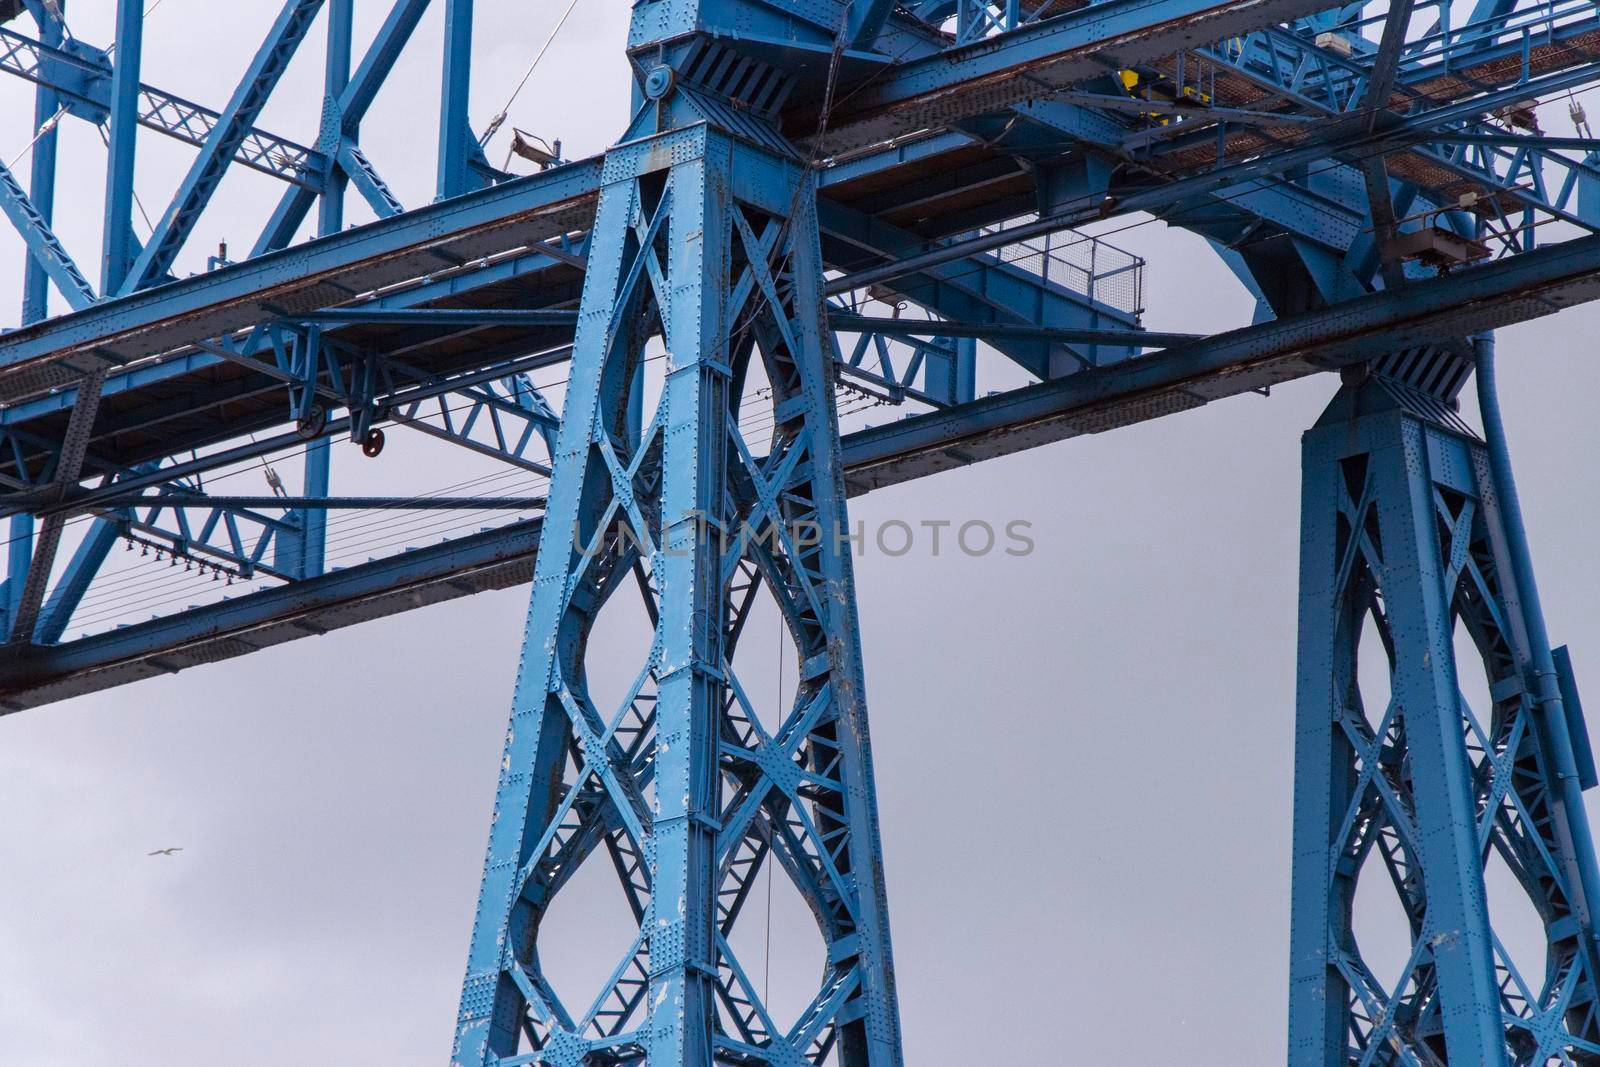 The Tees Transporter Bridge is a bridge in northern England. It is the furthest downstream bridge across the River Tees and the longest remaining transporter in the world.